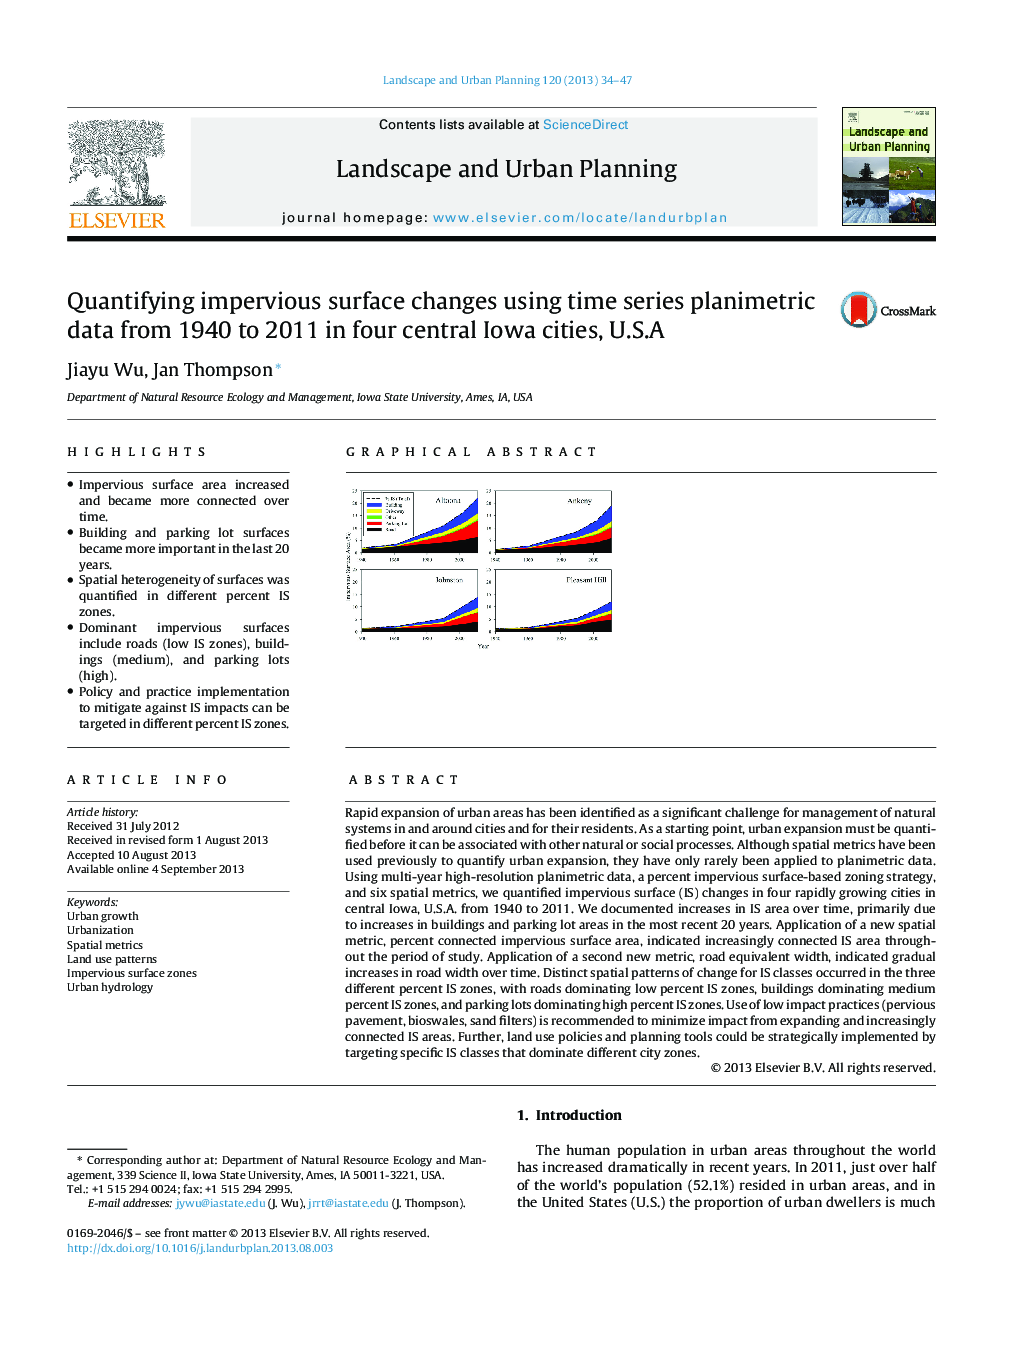 Quantifying impervious surface changes using time series planimetric data from 1940 to 2011 in four central Iowa cities, U.S.A